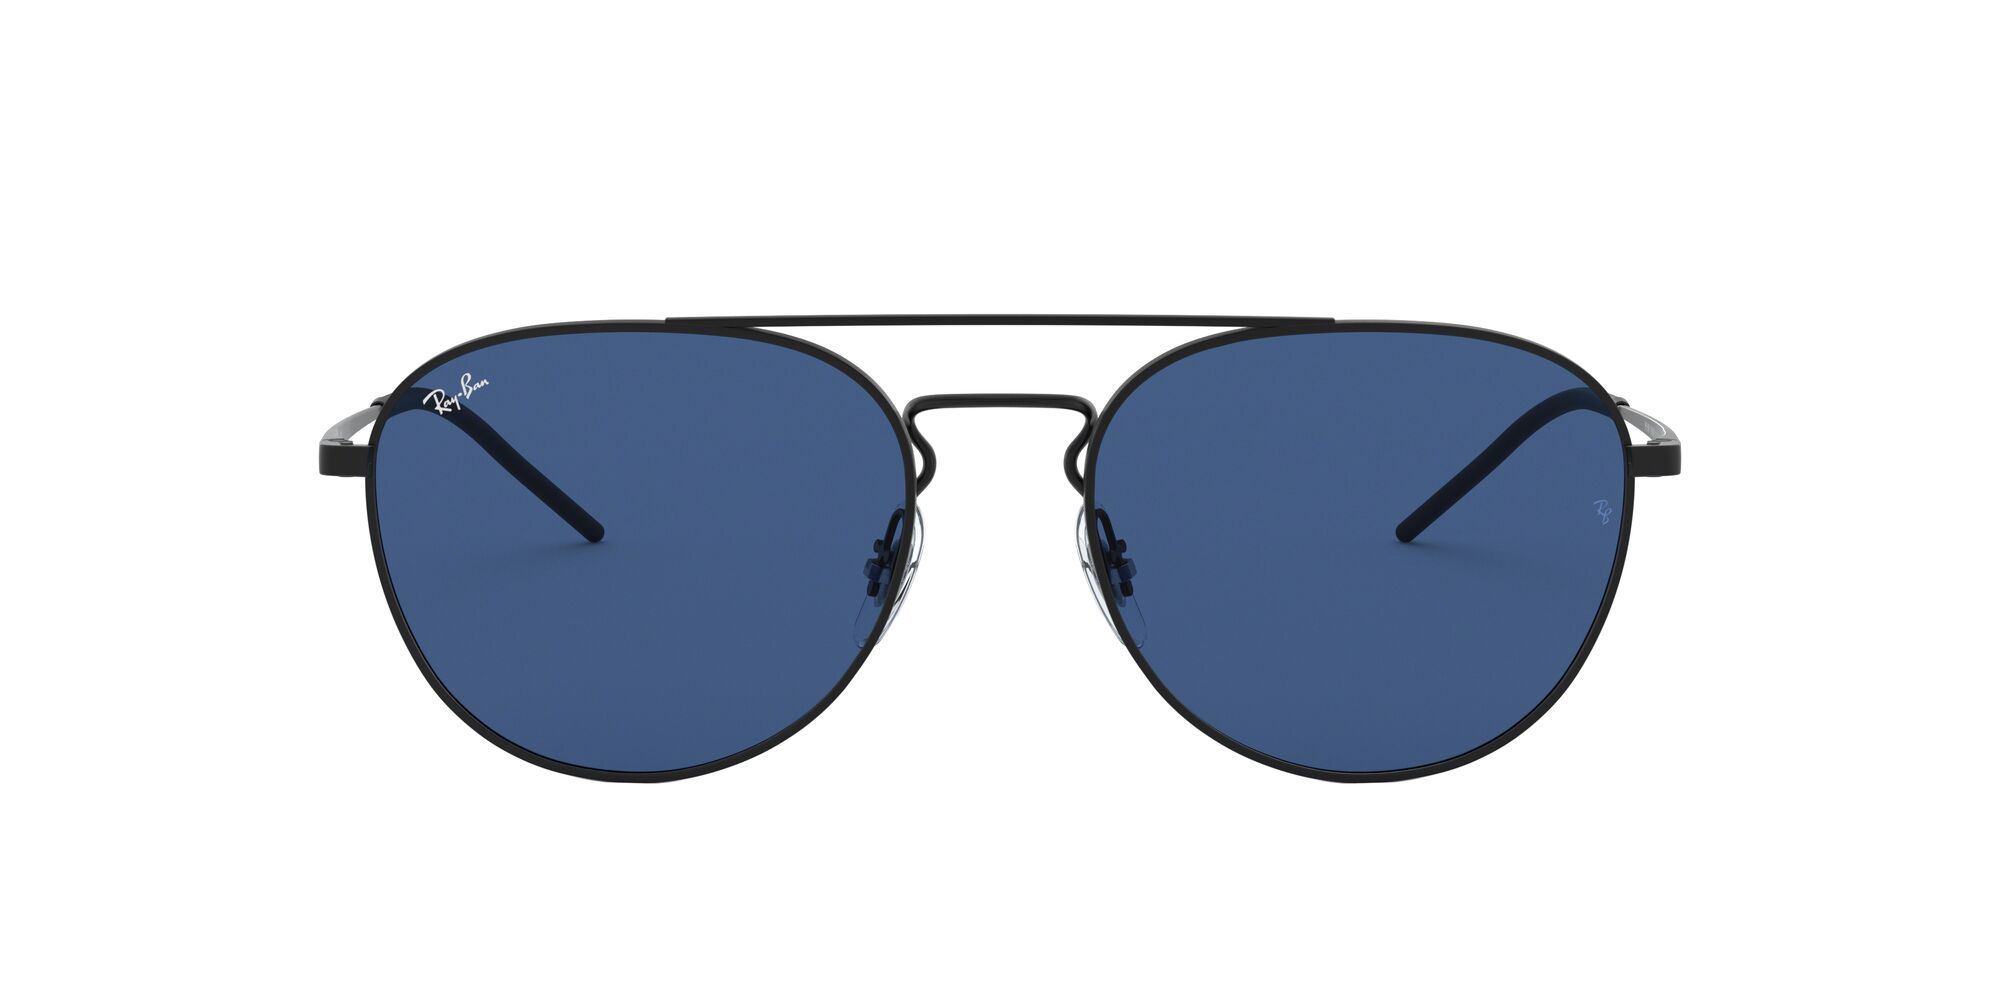 Ray-Ban 0RB3589 Blue Youngster Round Sunglasses (55 mm)